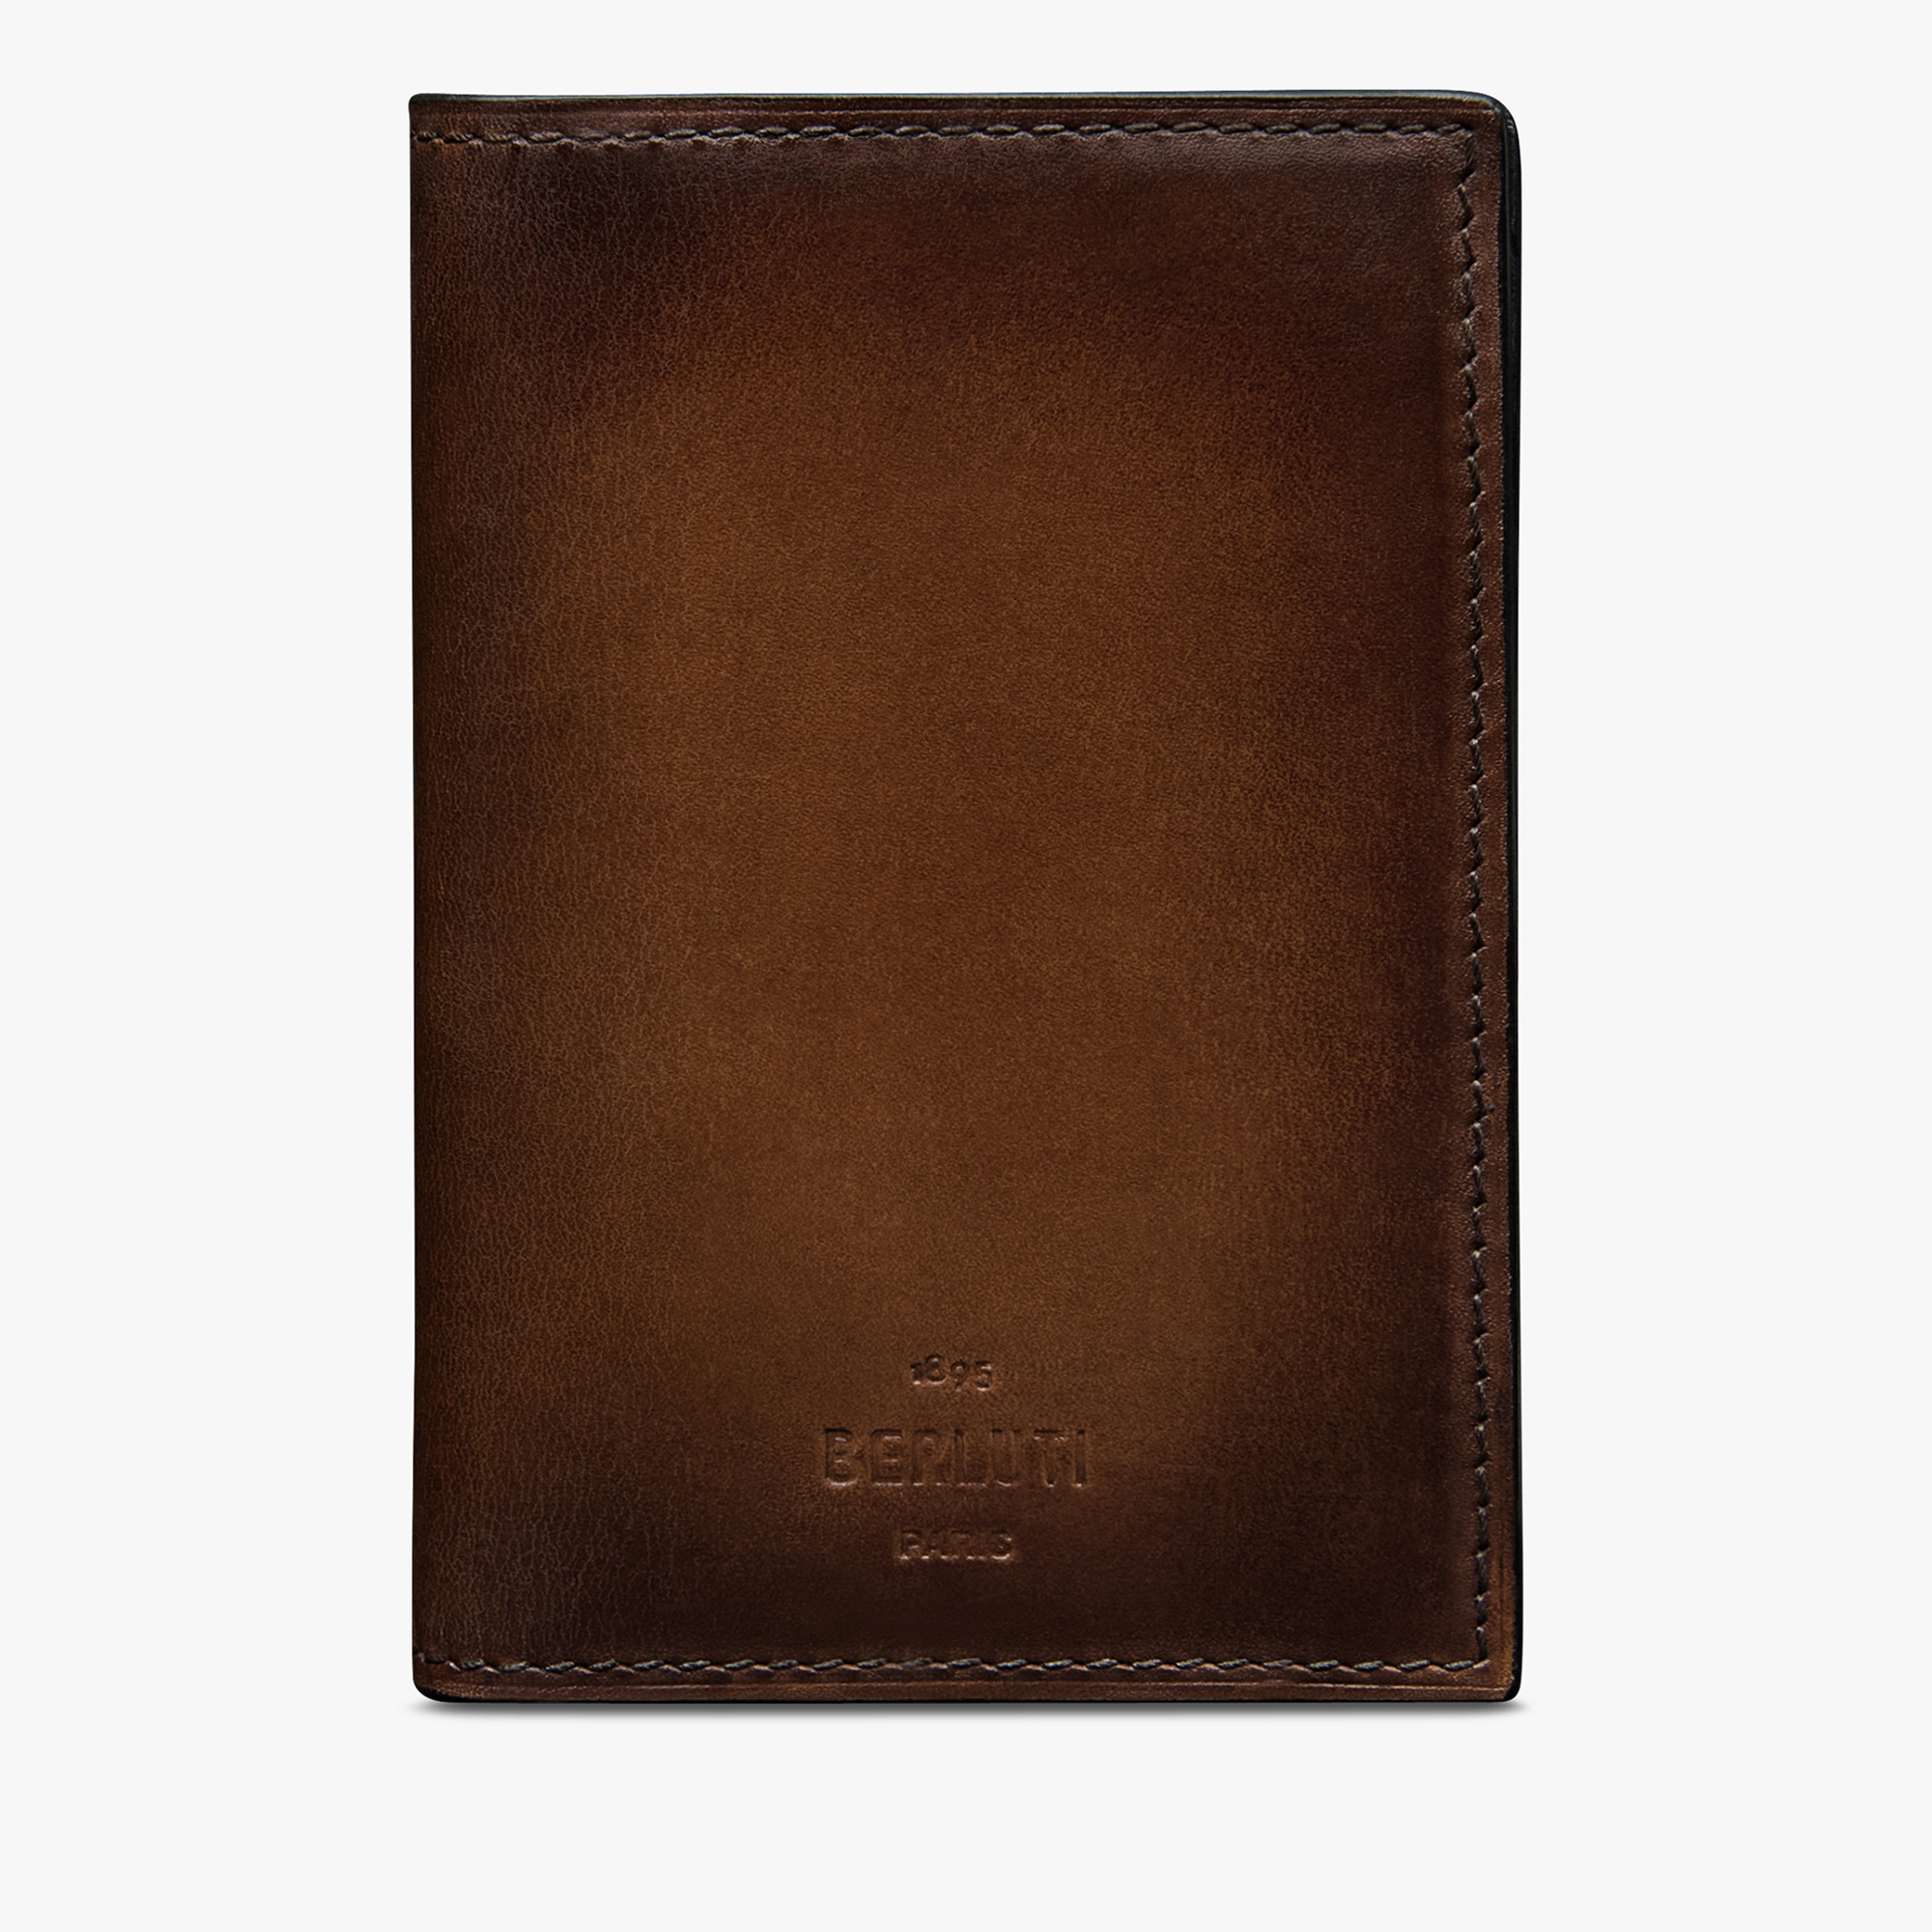 Jagua Leather Pocket Organizer, CACAO INTENSO, hi-res